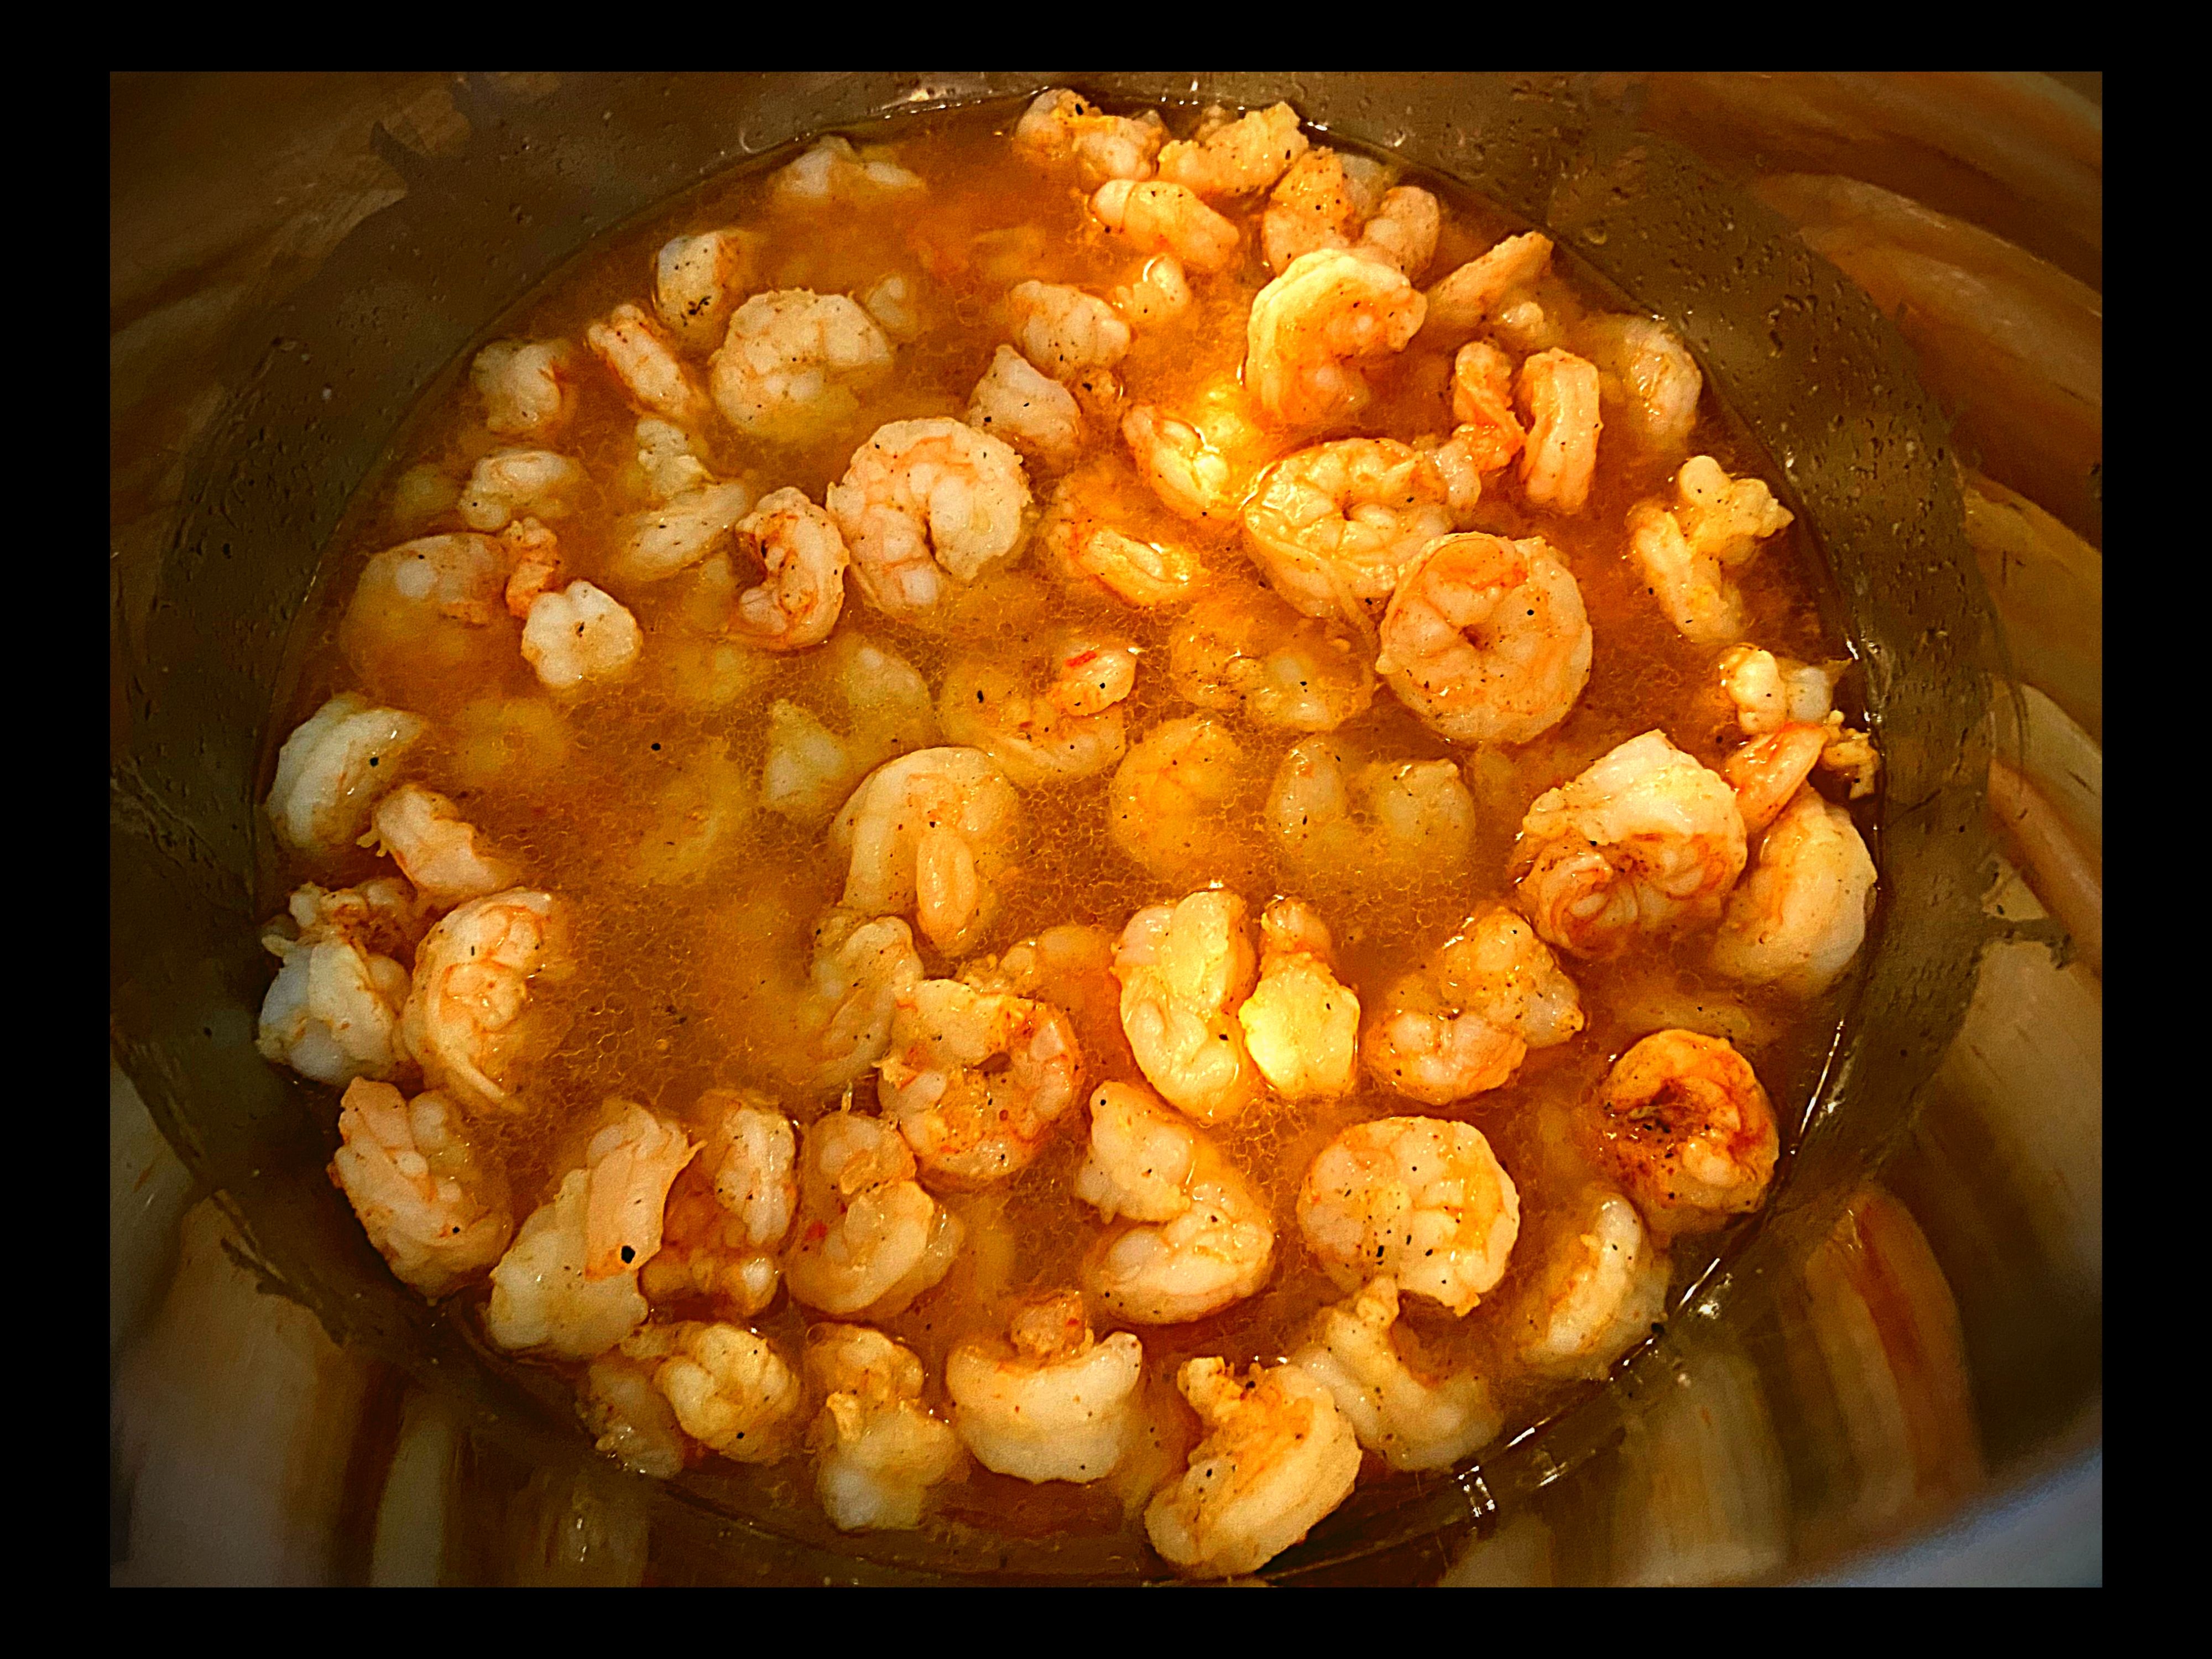 The inside of an Instant filled with cooked shrimp in butter, italian seasoning, and tony chacheres.